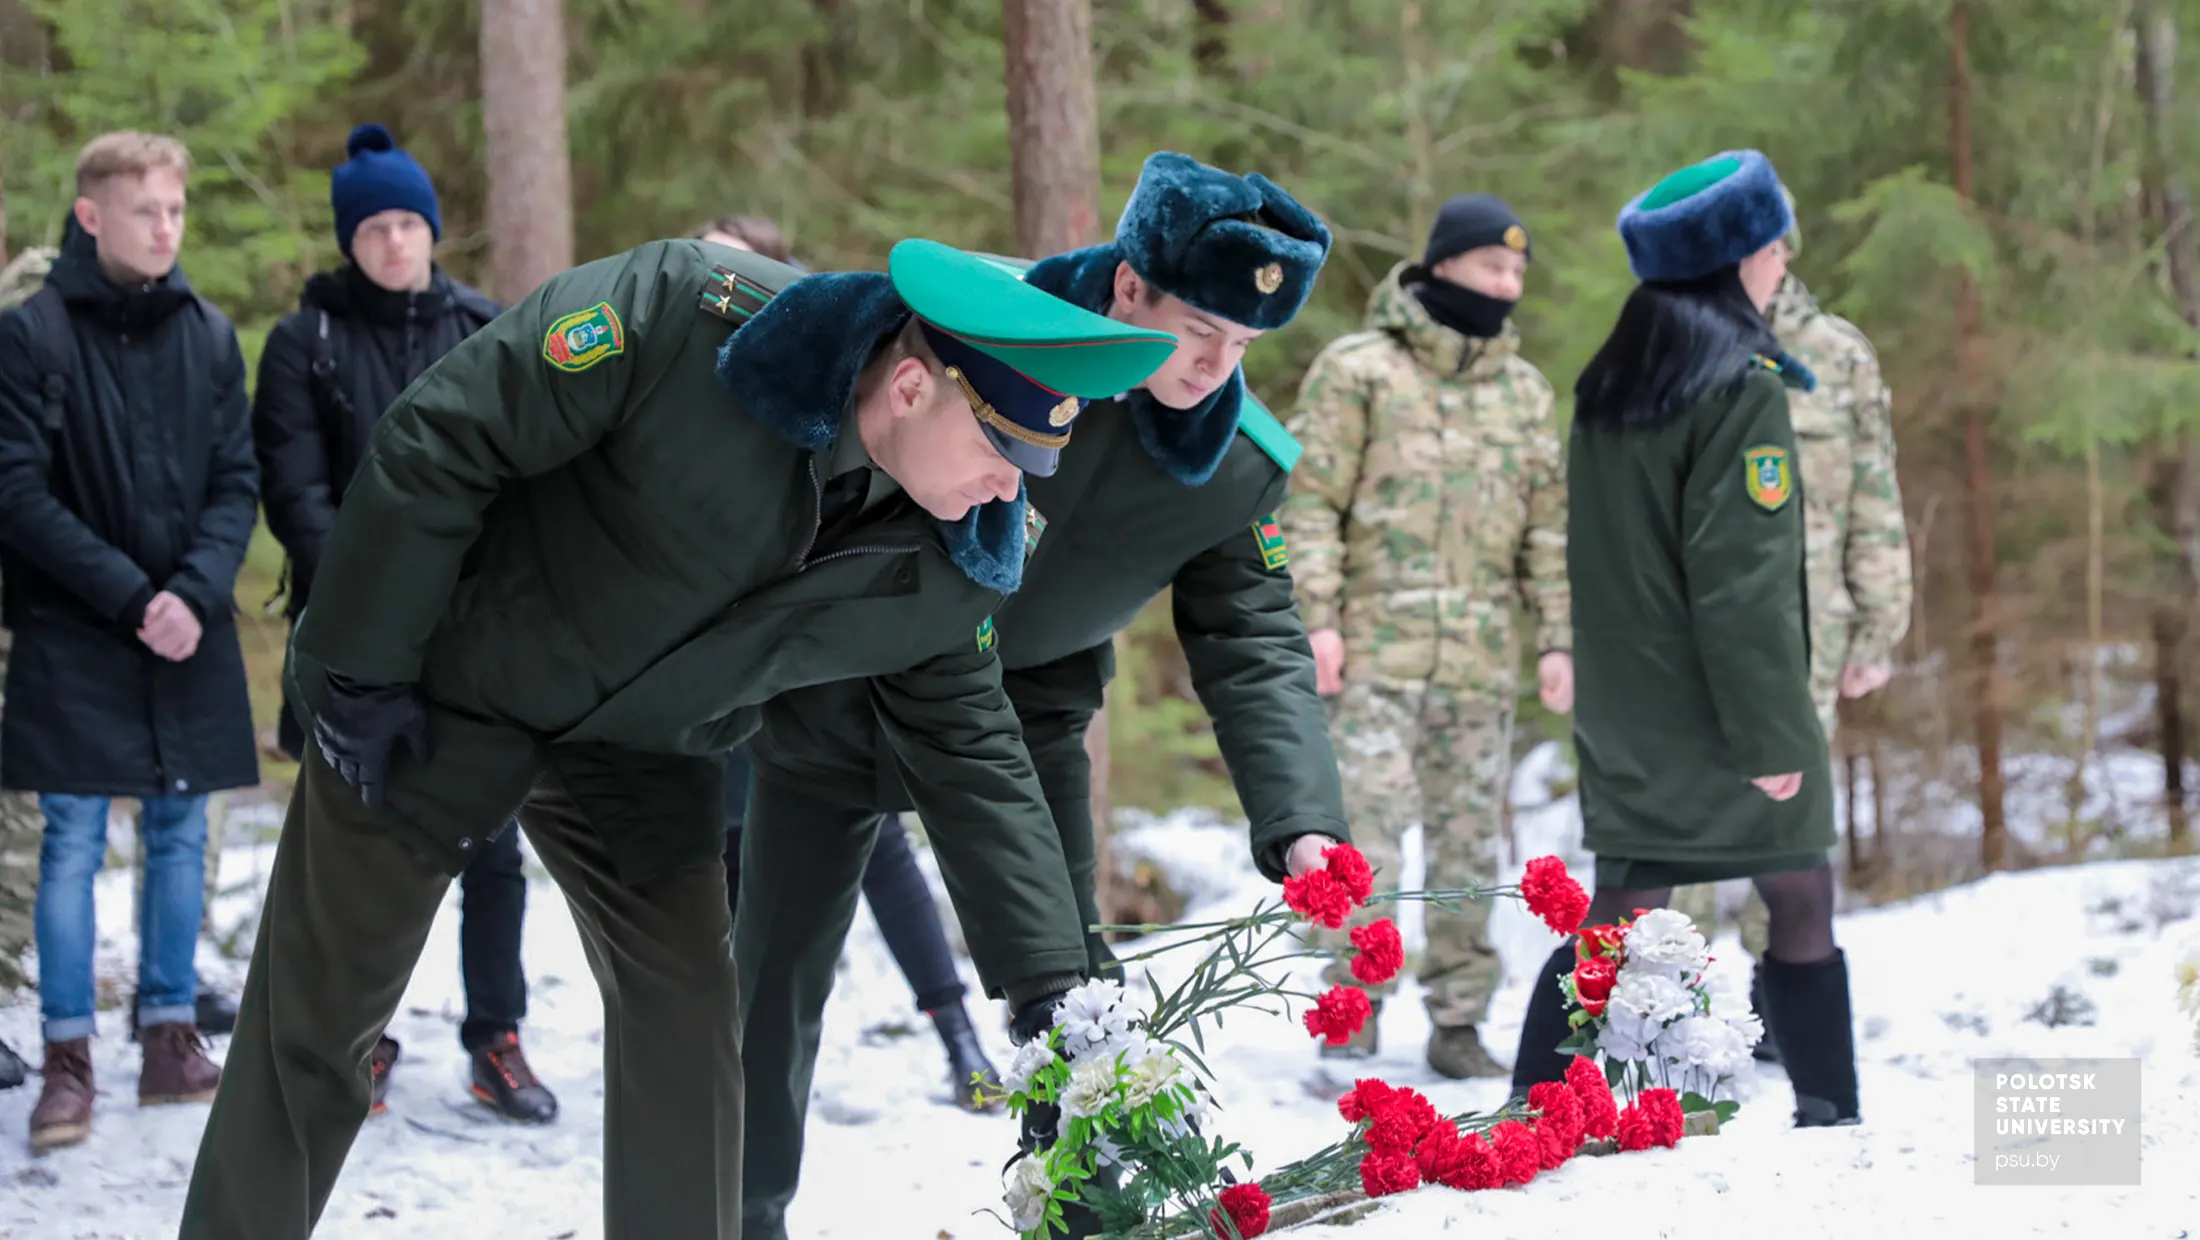 Tribute to the fallen heroes at the crash place of the IL-2 attack aircraft. Military personnel lay flowers